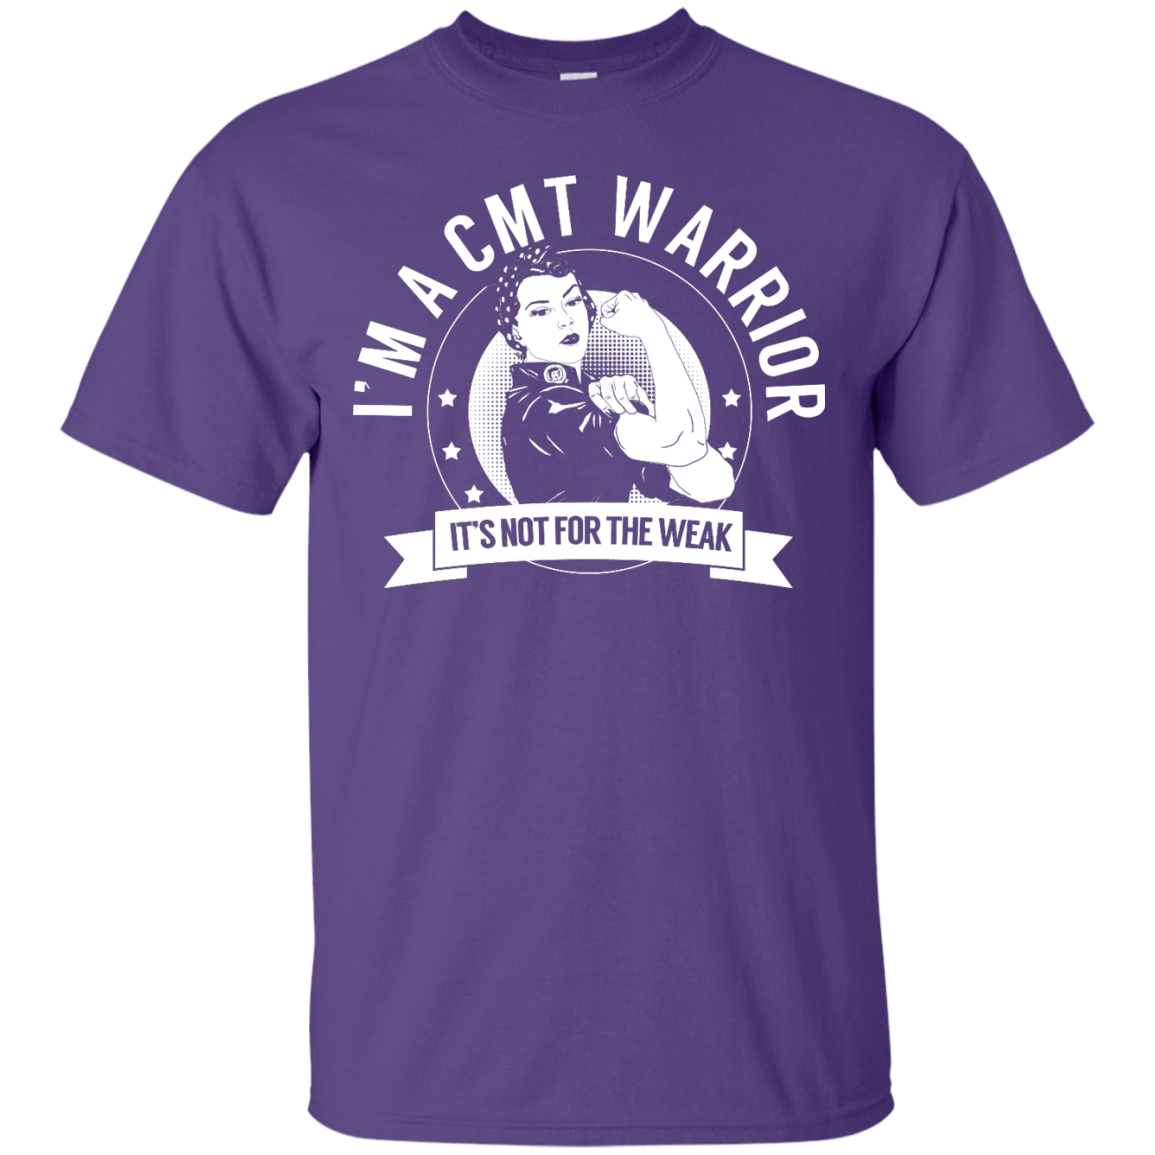 Charcot-Marie-Tooth Disease- CMT Warrior Not For The Weak Unisex Shirt - The Unchargeables